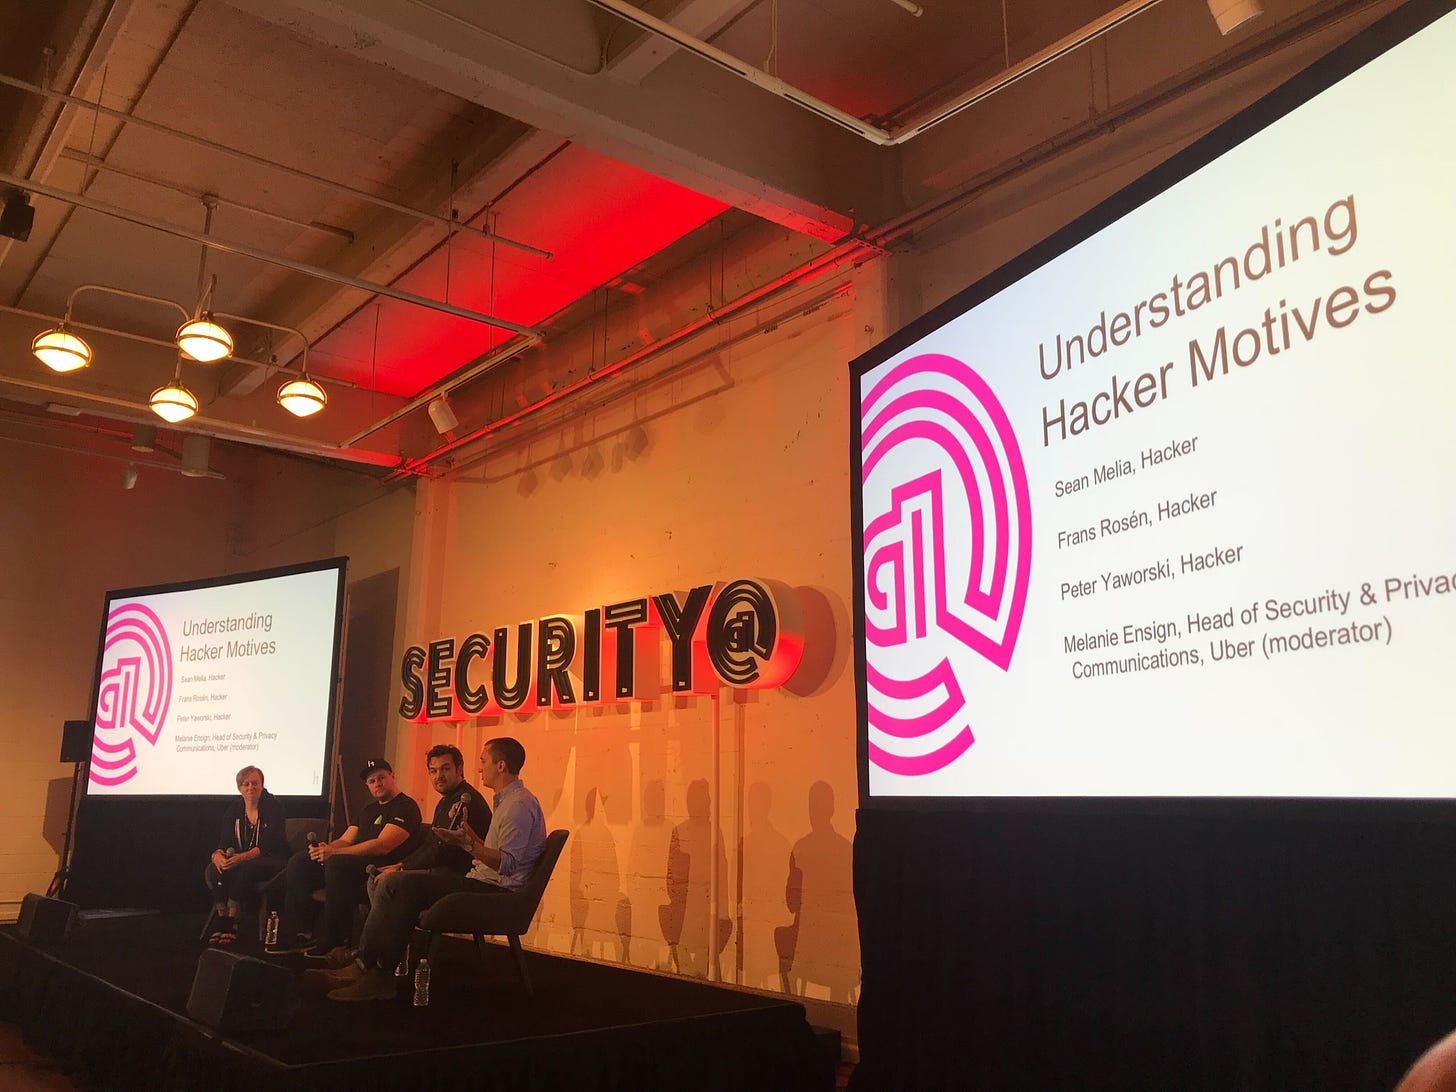 Picture from a security conference in which panelists sit in front of a sign that says "Security."